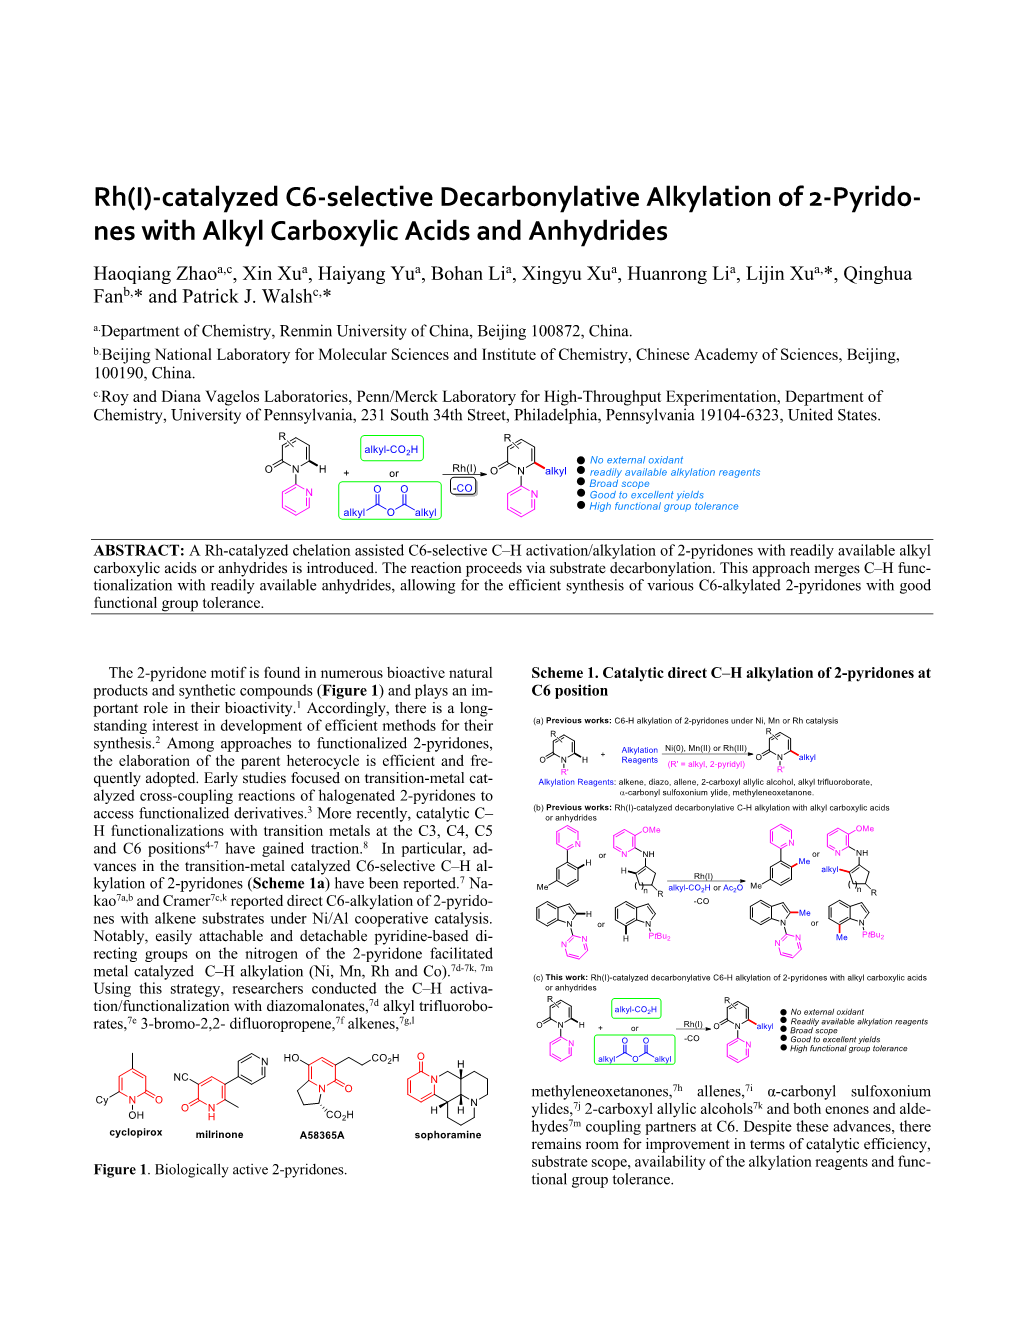 Catalyzed C6-Selective Decarbonylative Alkylation of 2-Pyrido- Nes with Alkyl Carboxylic Acids and Anhydrides